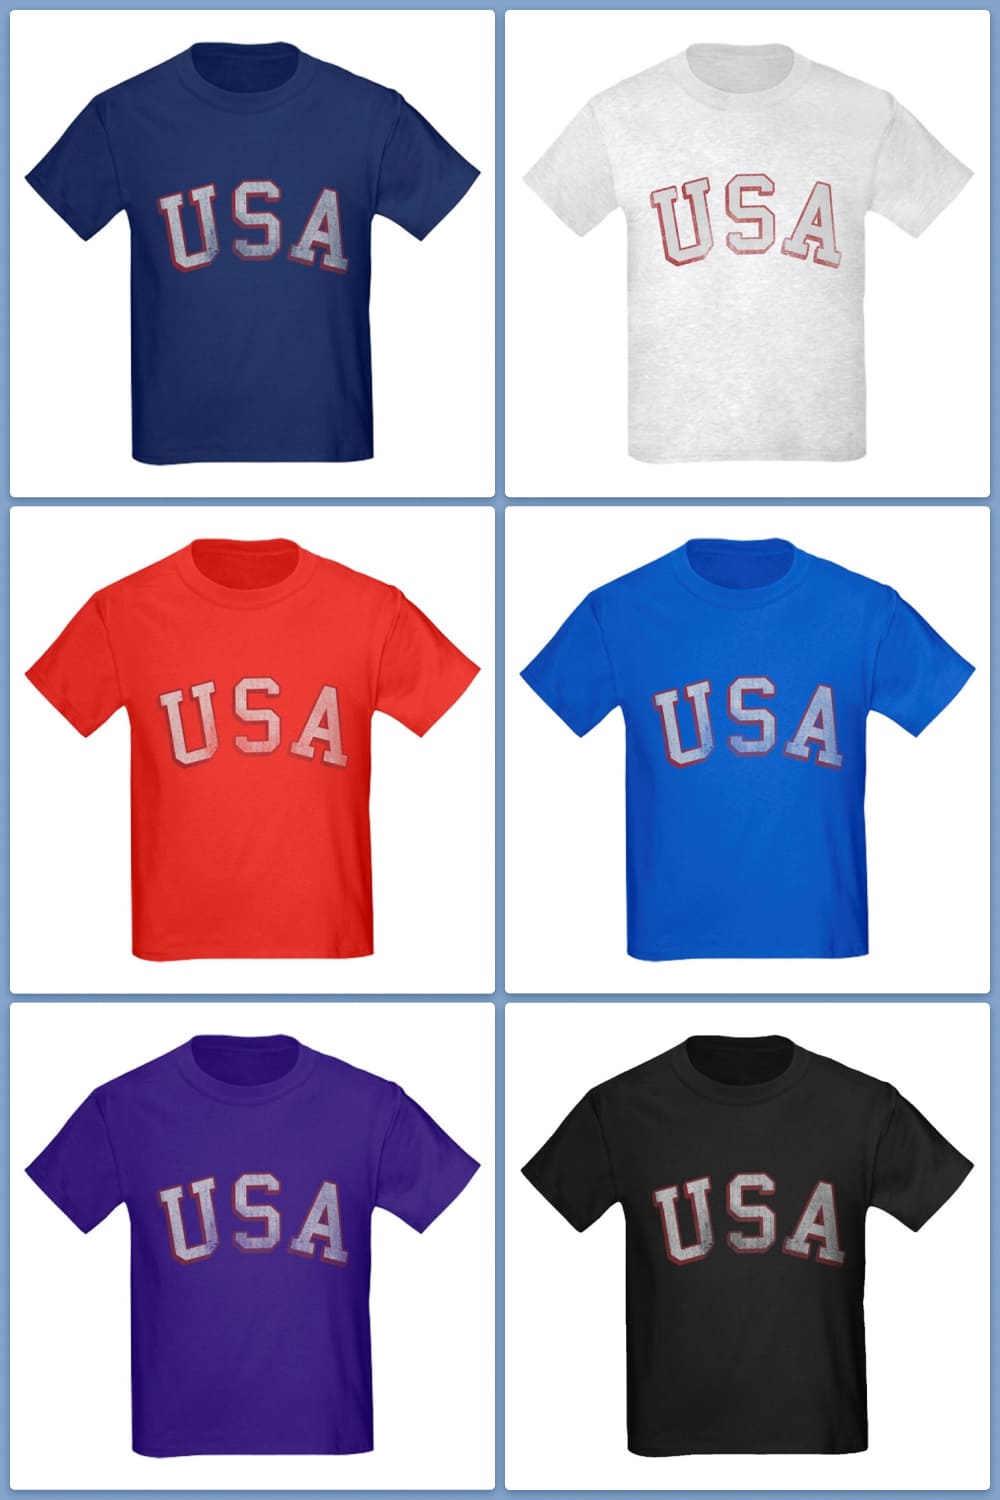 Collage of multi-colored T-shirts with the inscription USA.